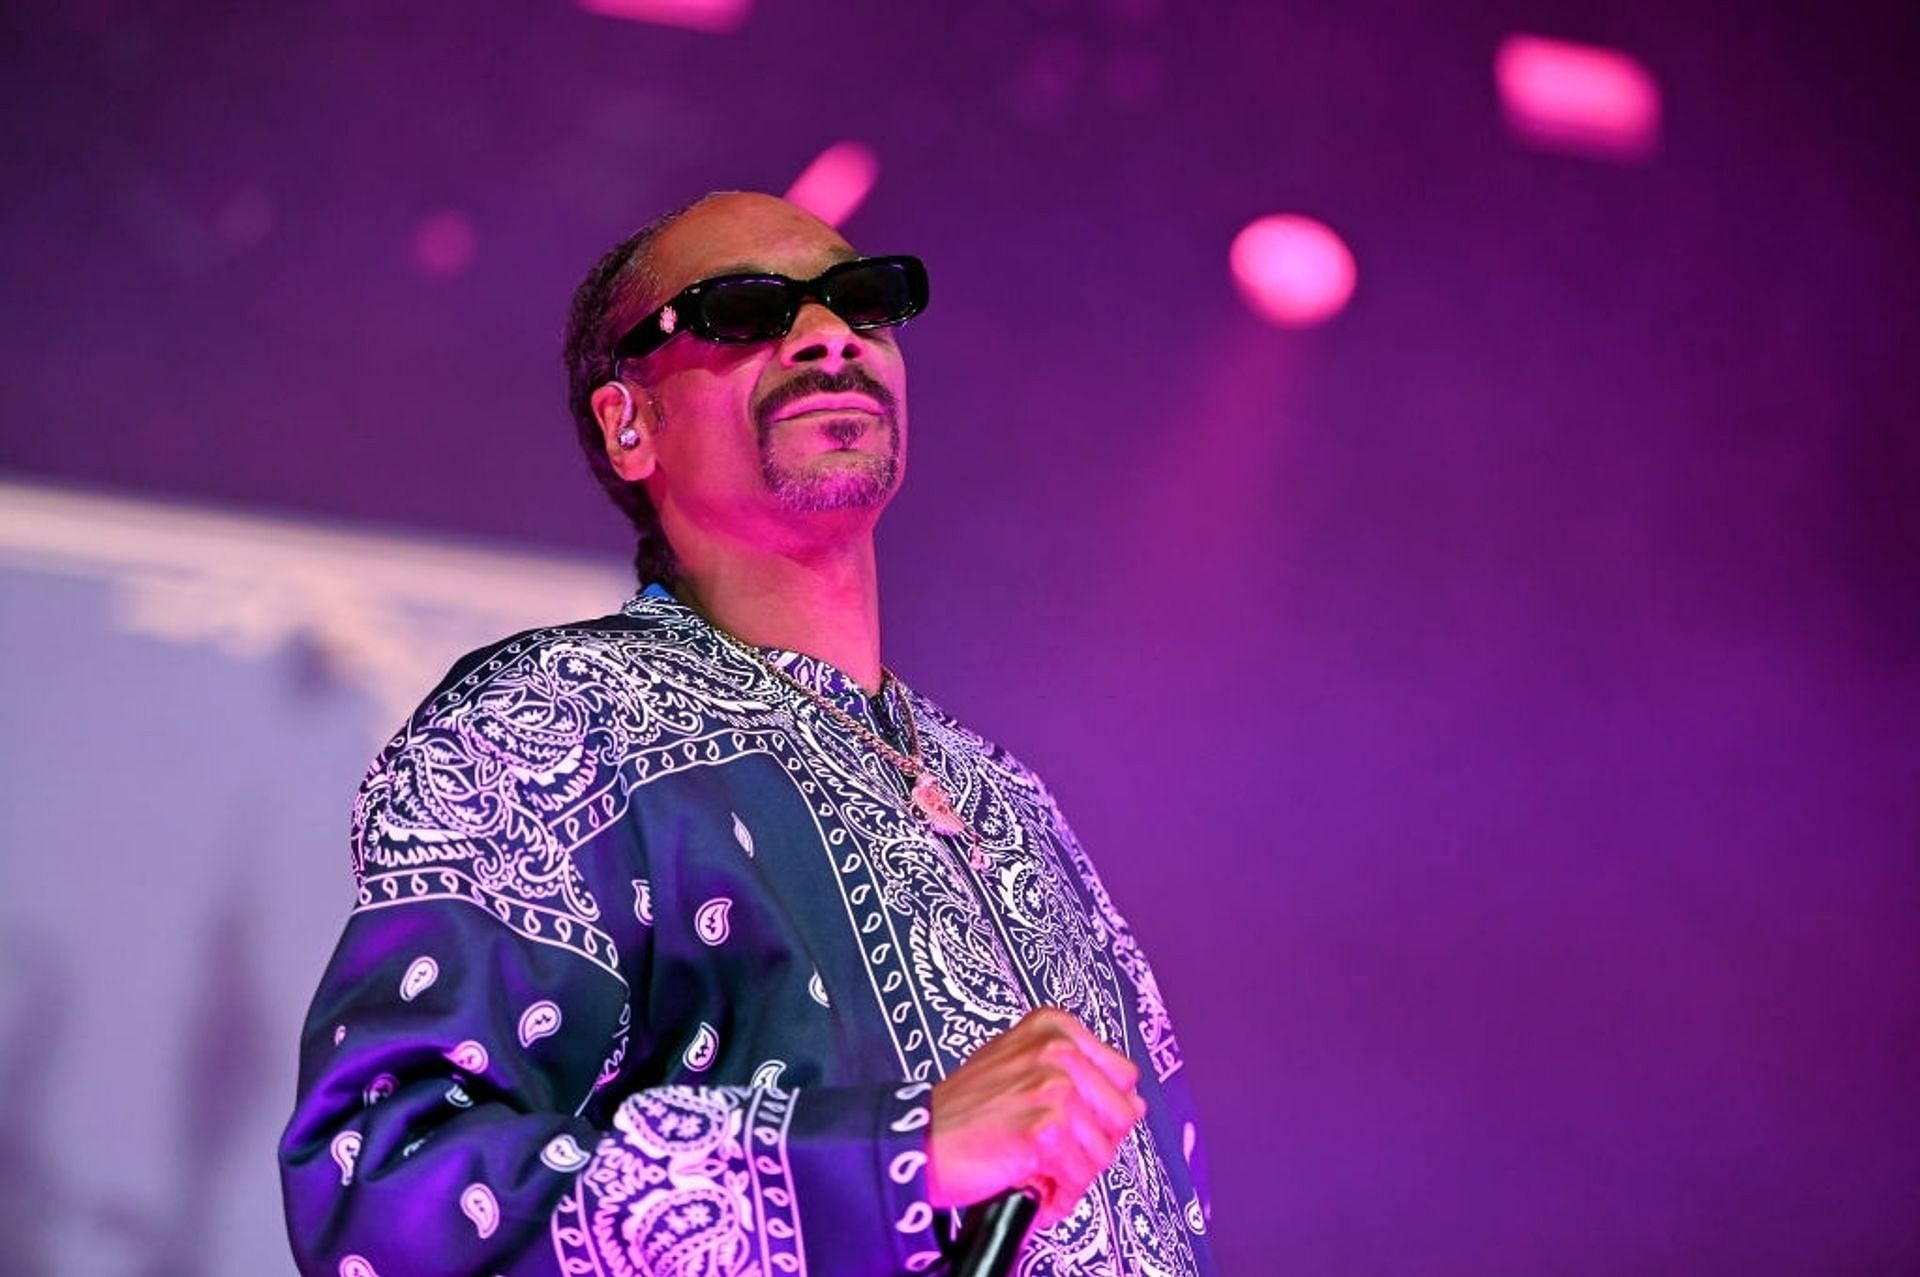 Snoop Dogg has acquired Death Row Records (Image via Stephen J. Cohen/Getty Images)